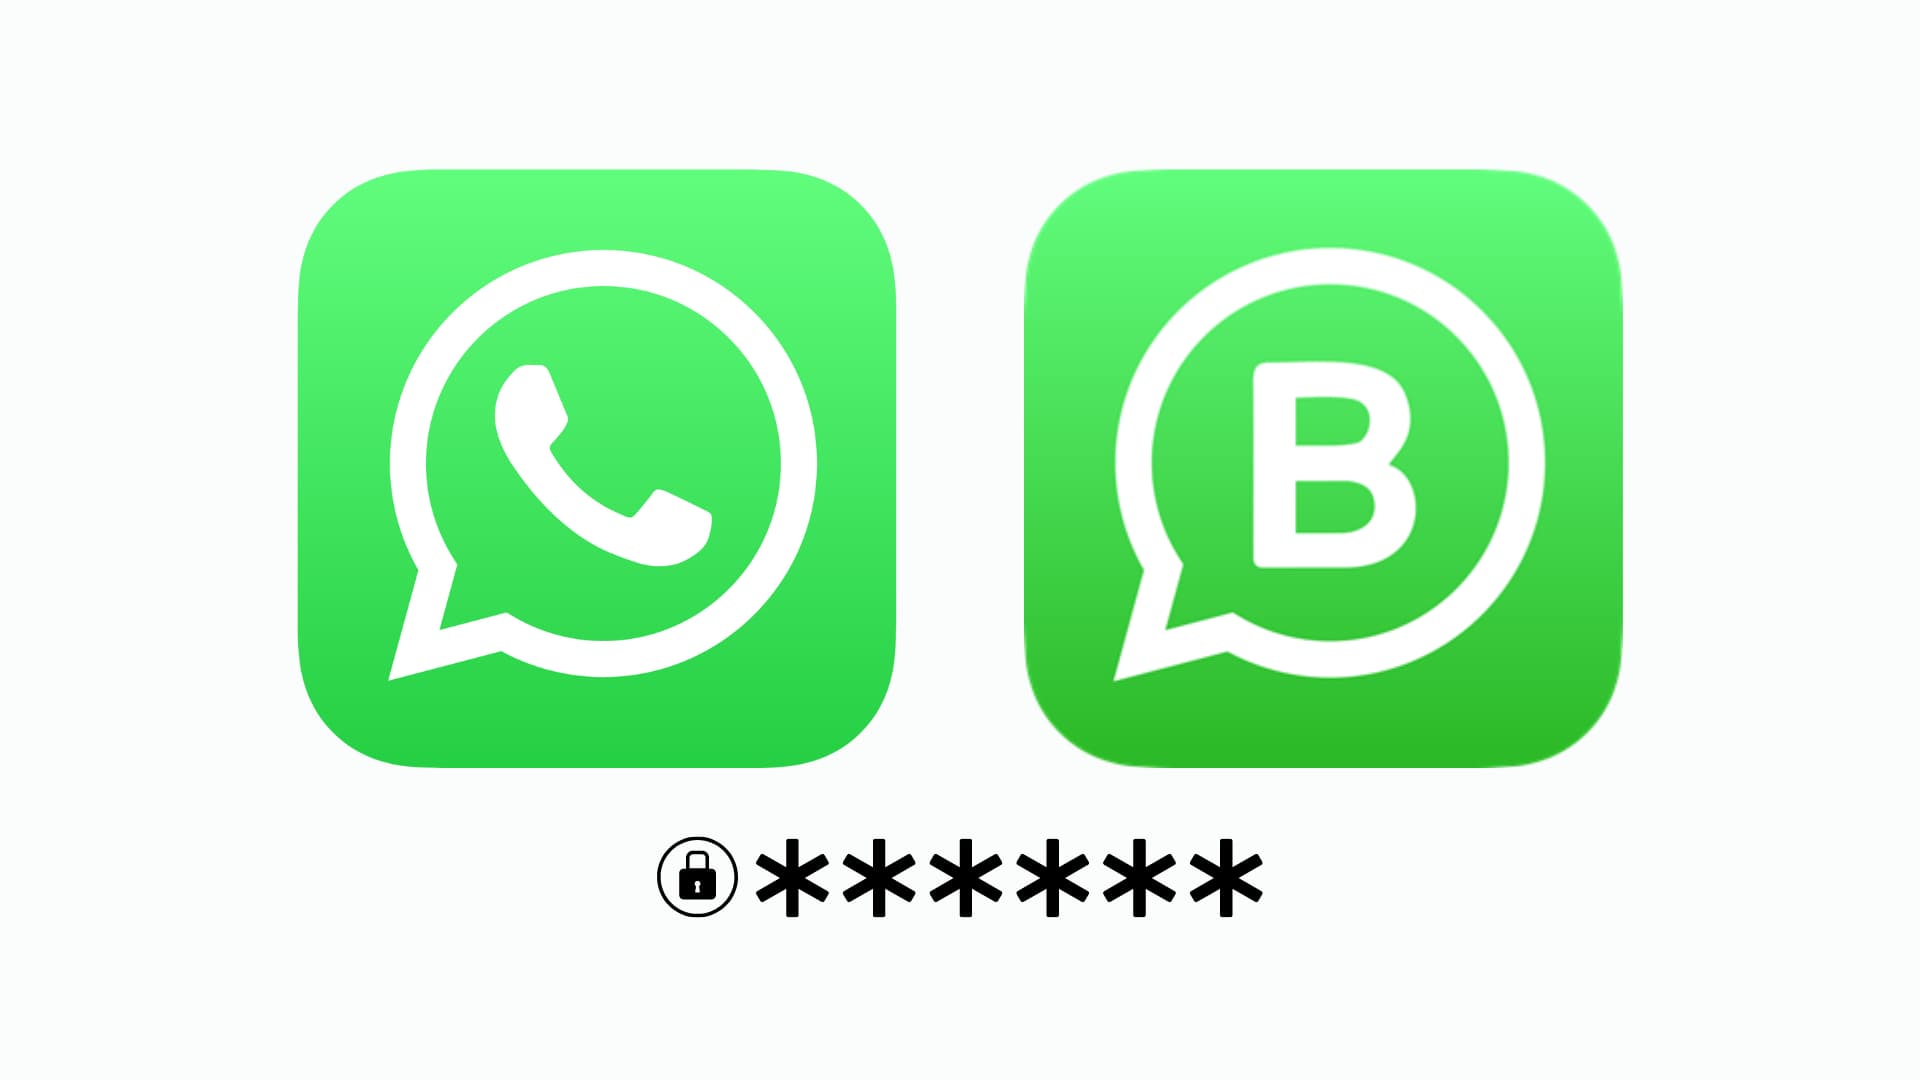 WhatsApp and WhatsApp Business app icons with six passcode stars for two-step verification